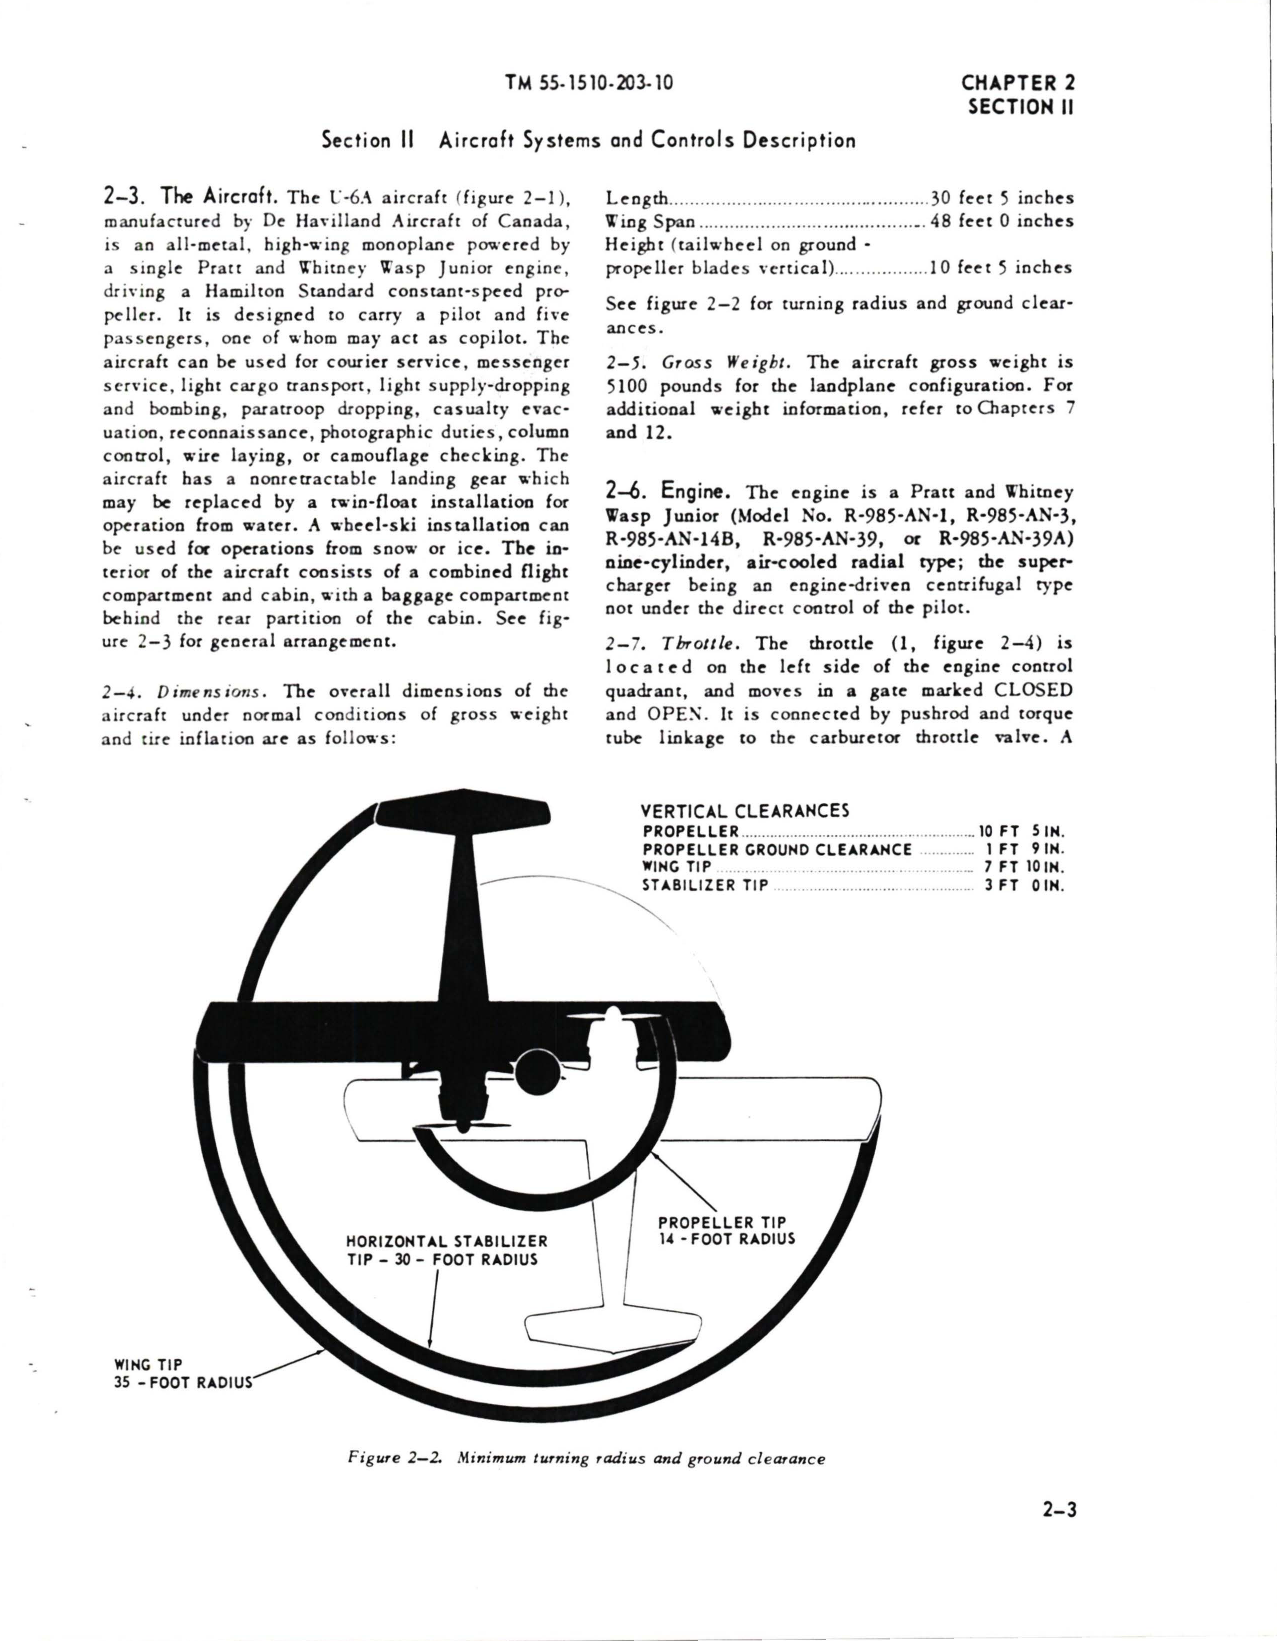 Sample page 9 from AirCorps Library document: Operator's Manual for U-6A